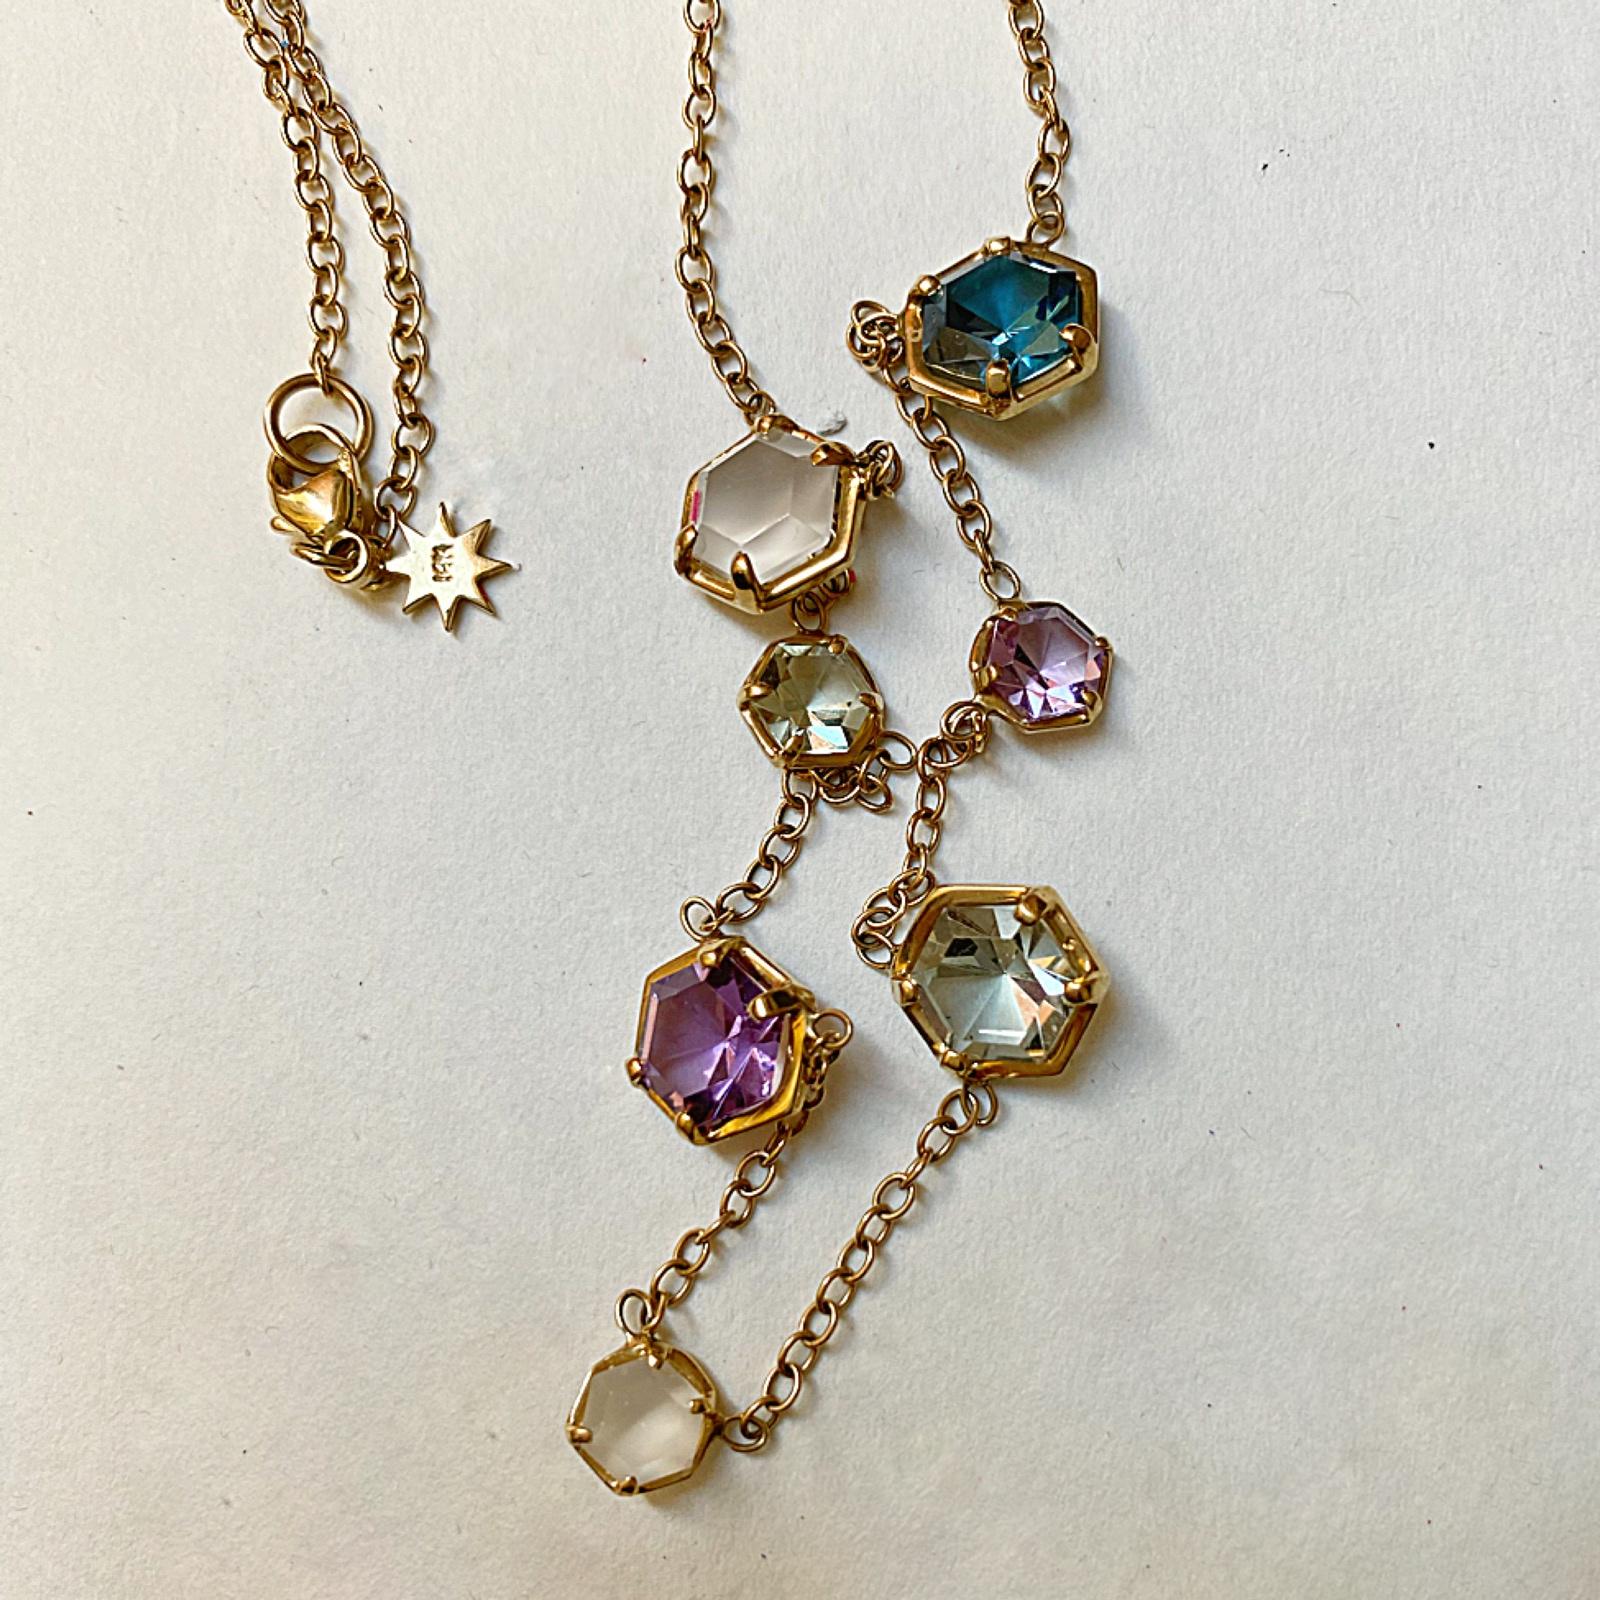 Modern and colorful with custom cut, multi-hued hexagons. Each stone is set along a gold chain, finished with our logo star charm.
Materials: 14 Karat Gold, London Blue Topaz, Green and Lavender Amethyst, Rainbow Moonstone
16/18